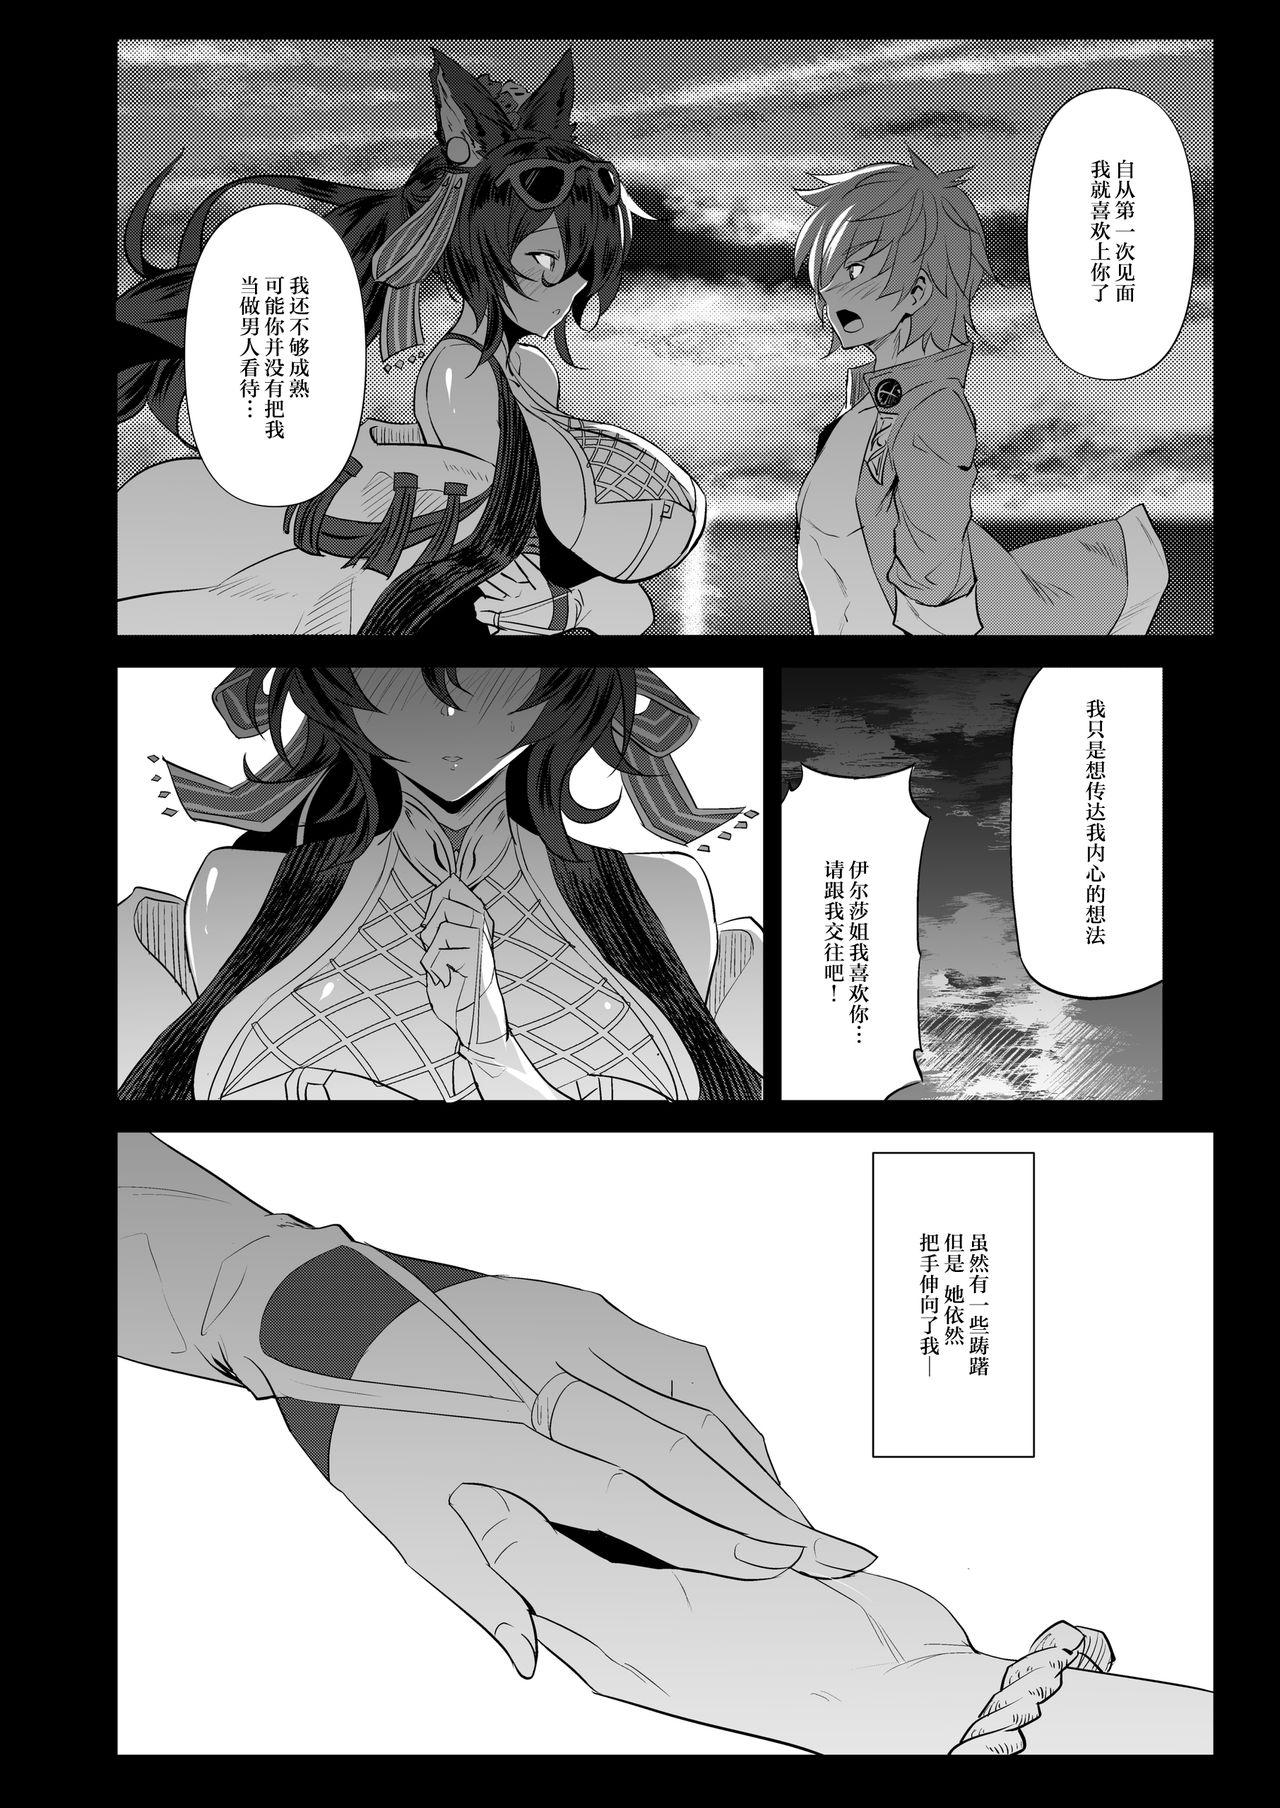 Old And Young Ilsa true LOVE - Granblue fantasy Village - Page 5